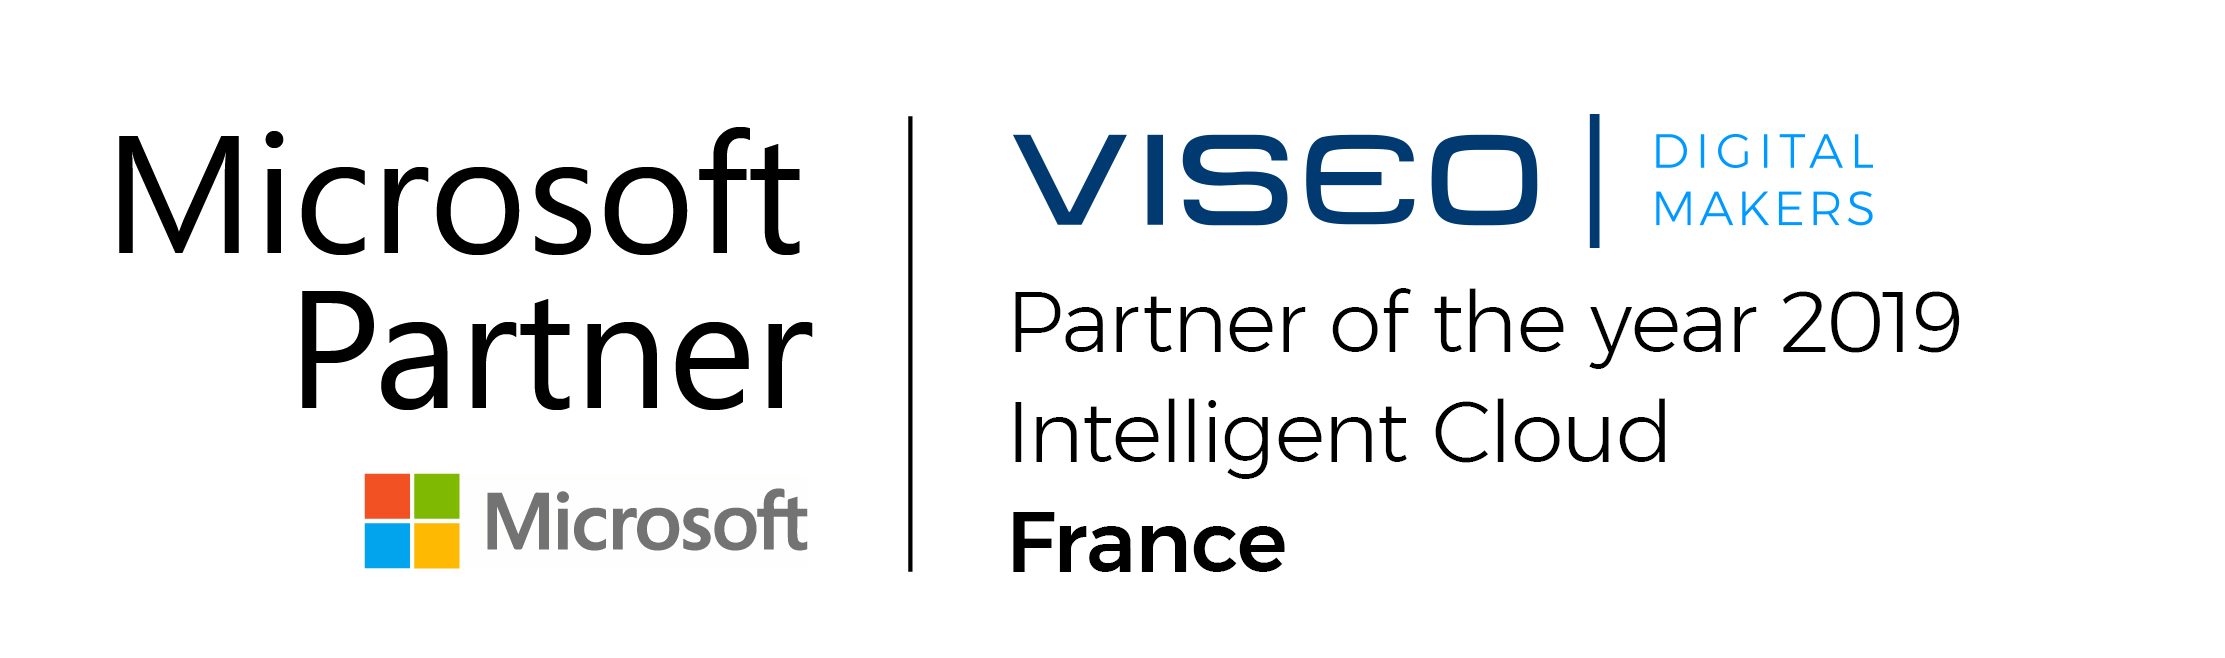 Microsoft partner of the year intelligence cloud by VISEO